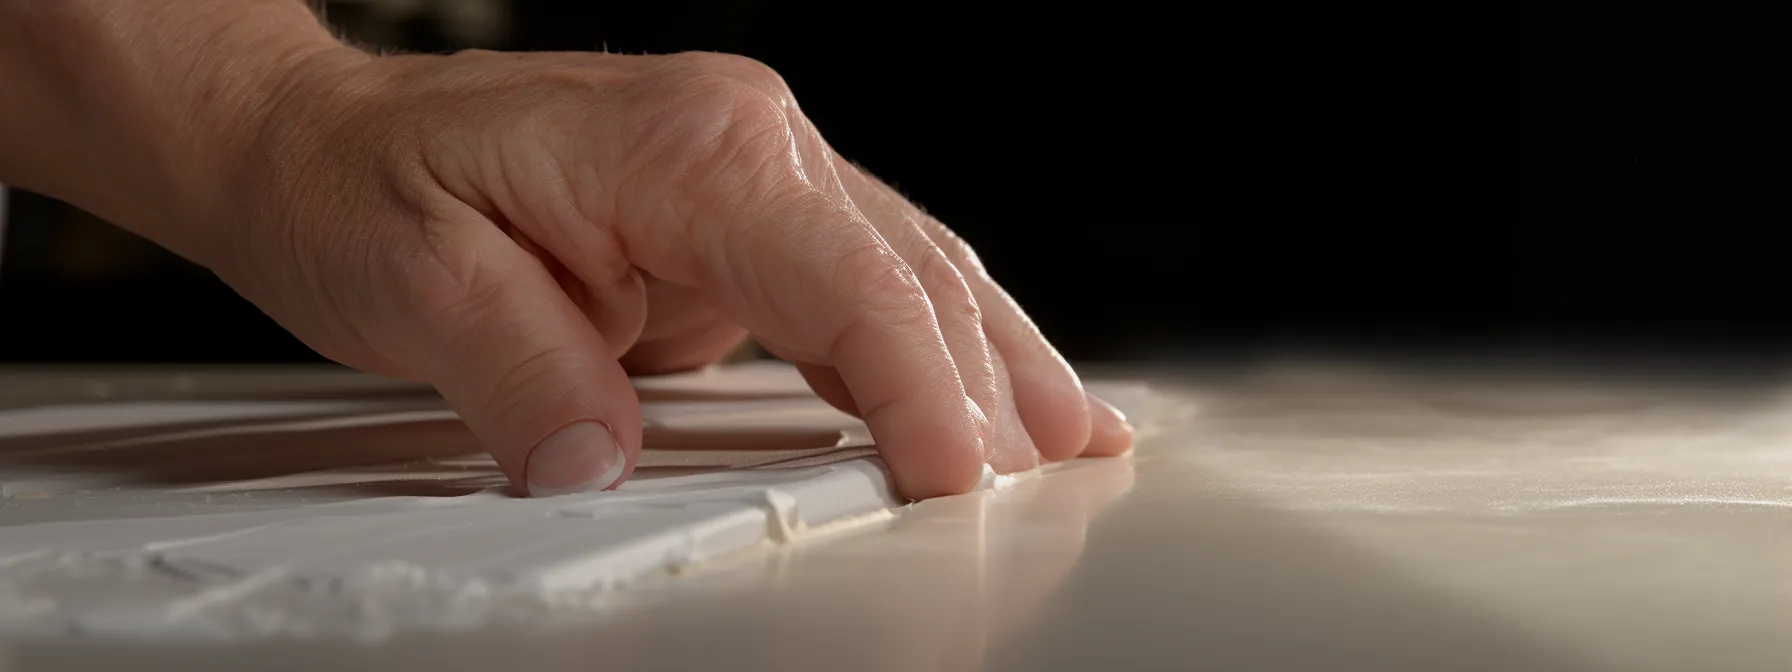 a person applying joint compound and smoothing it along the seam for a seamless finish.